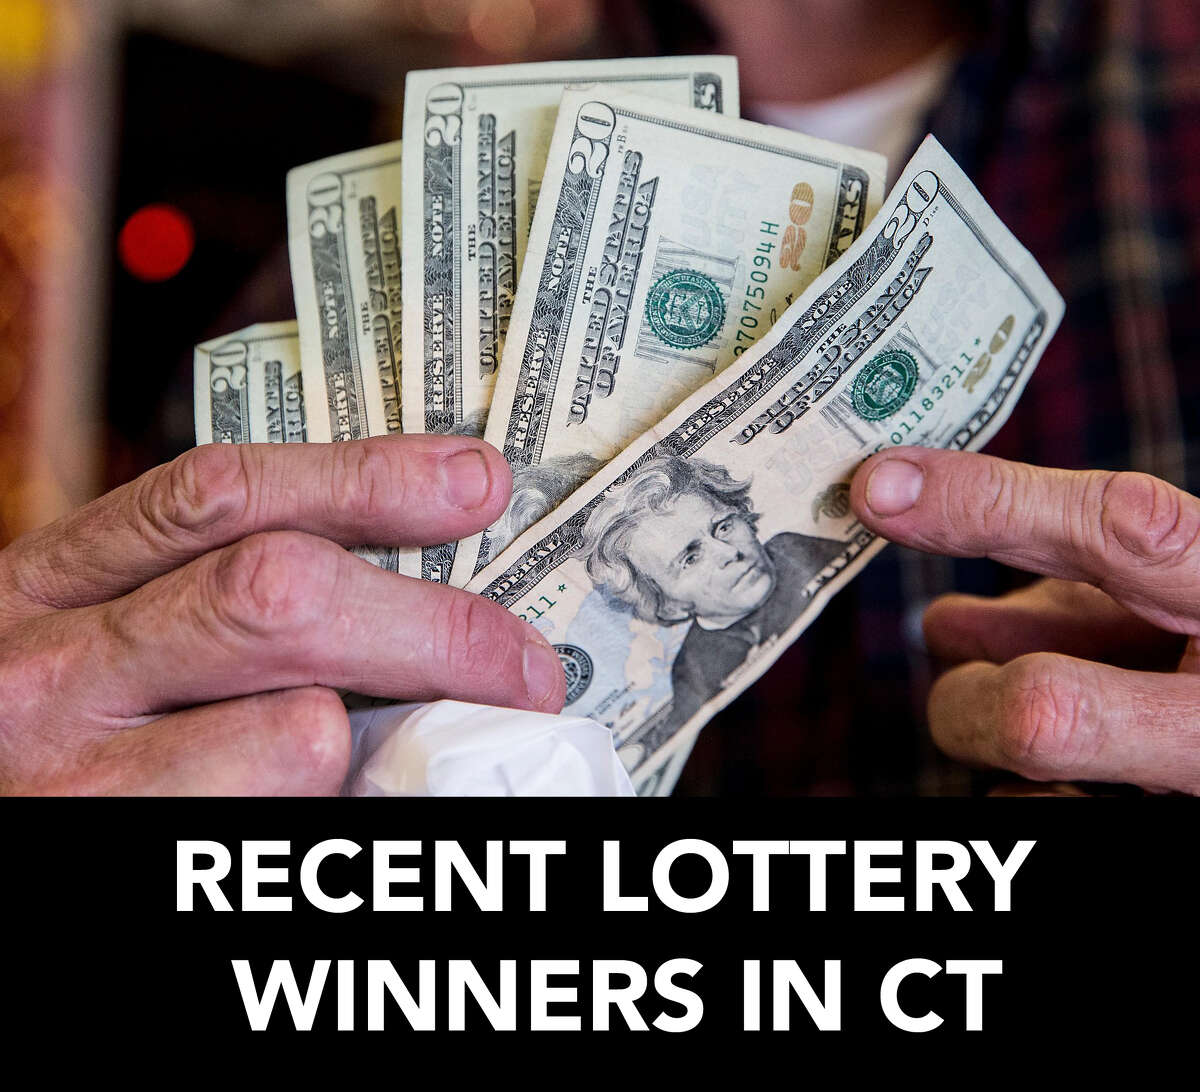 5 people claim 280,000 with CT Lottery wins